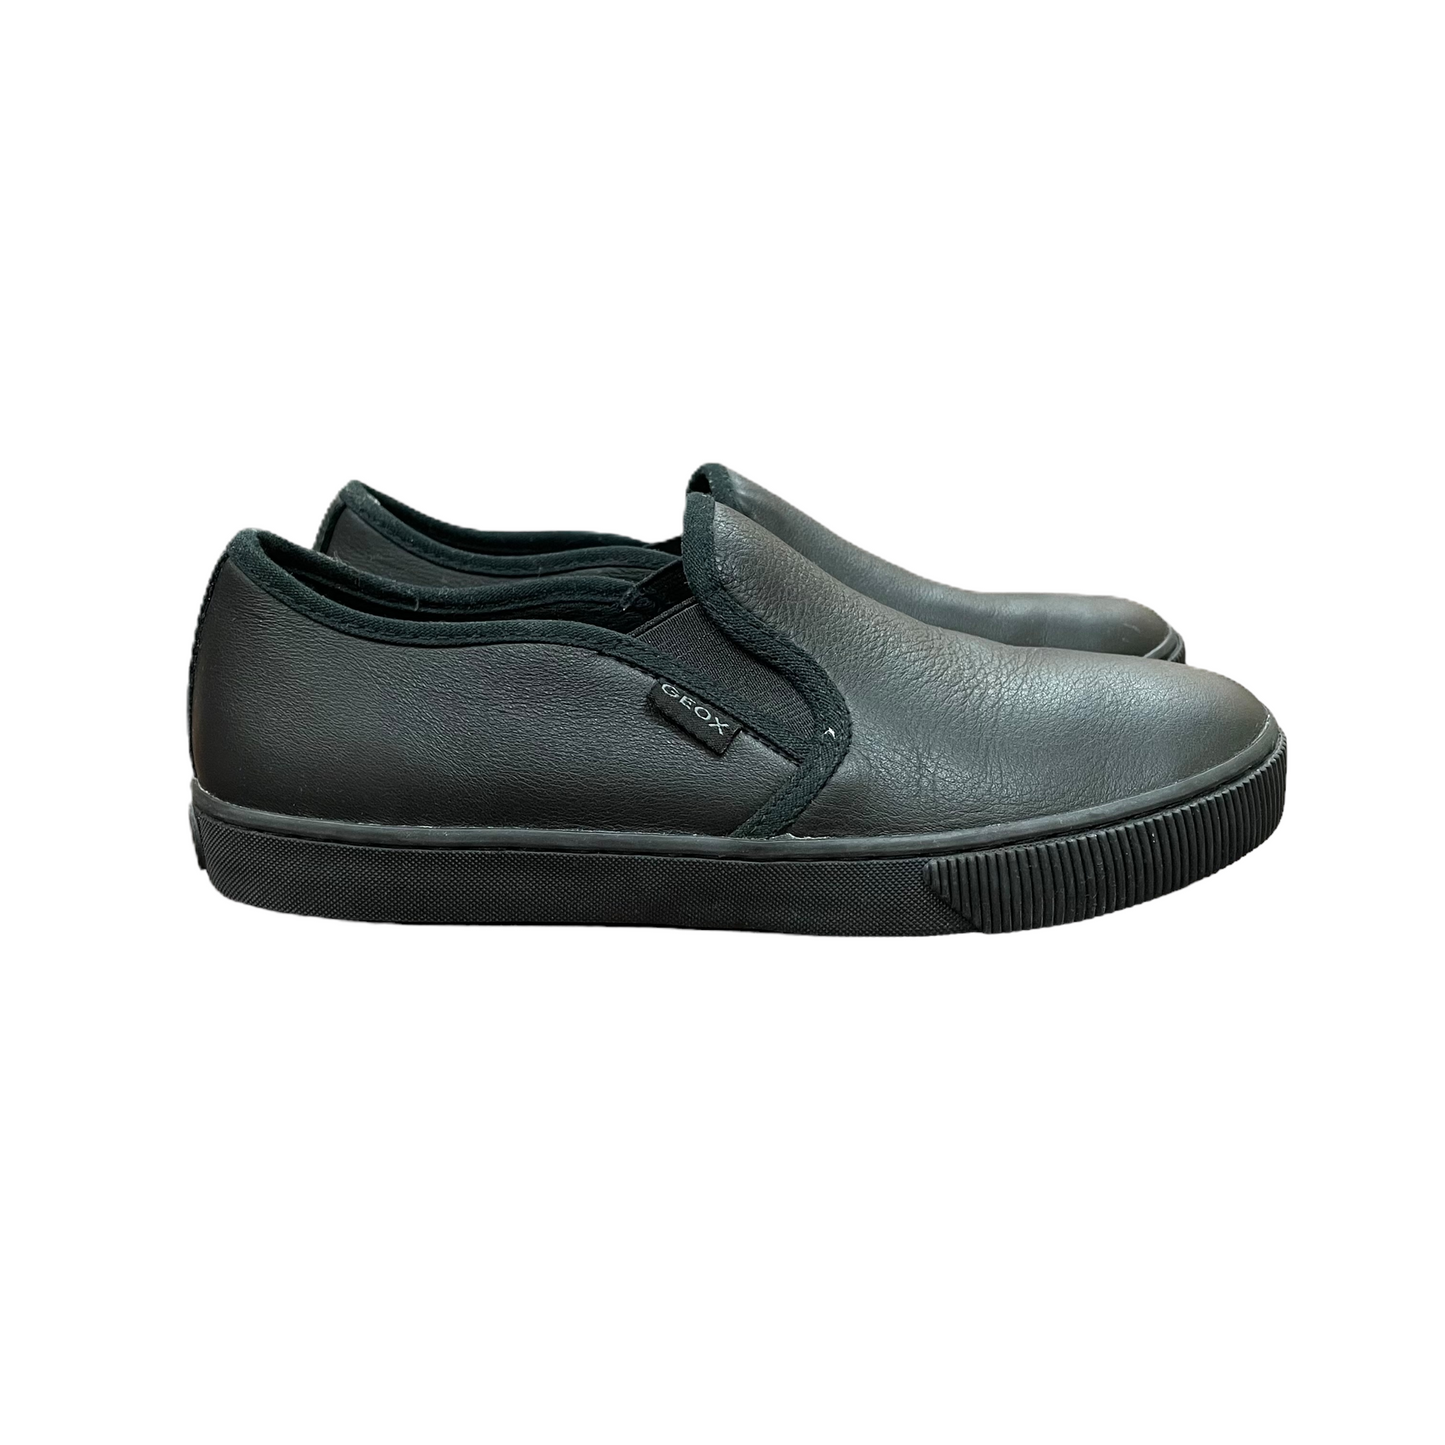 Black Shoes Flats By Geox Shoes, Size: 5